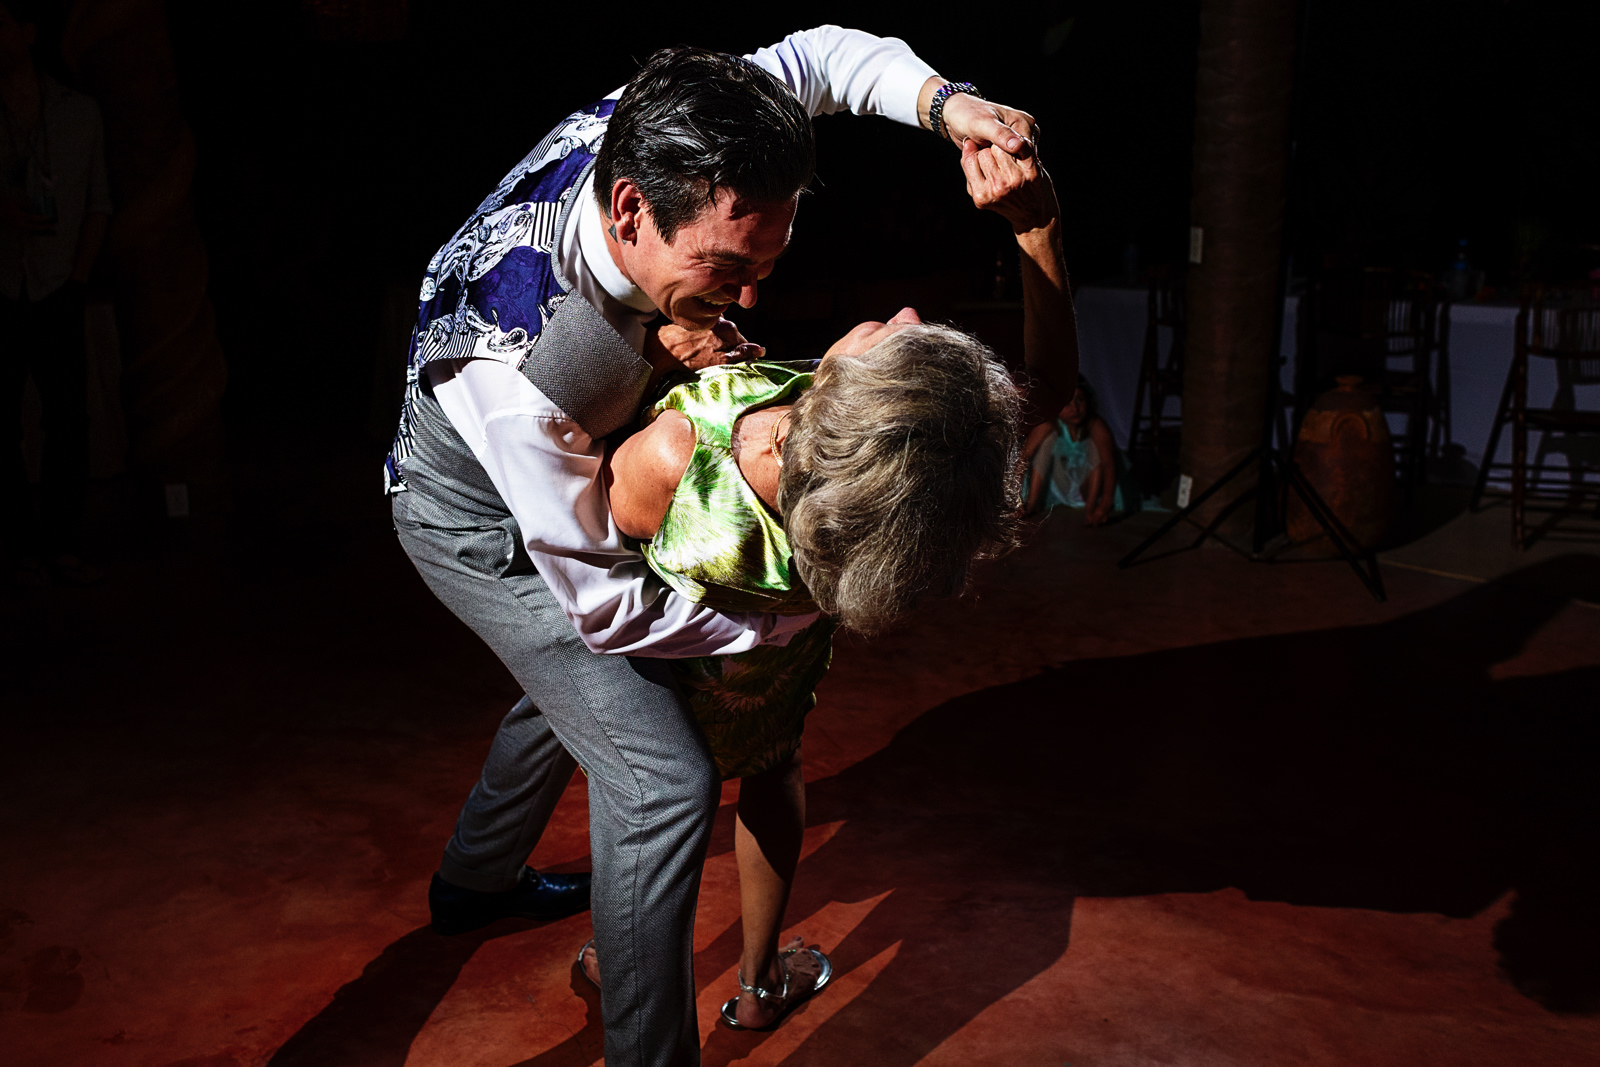 Groom leans his mother at the end of their dance as mother and son